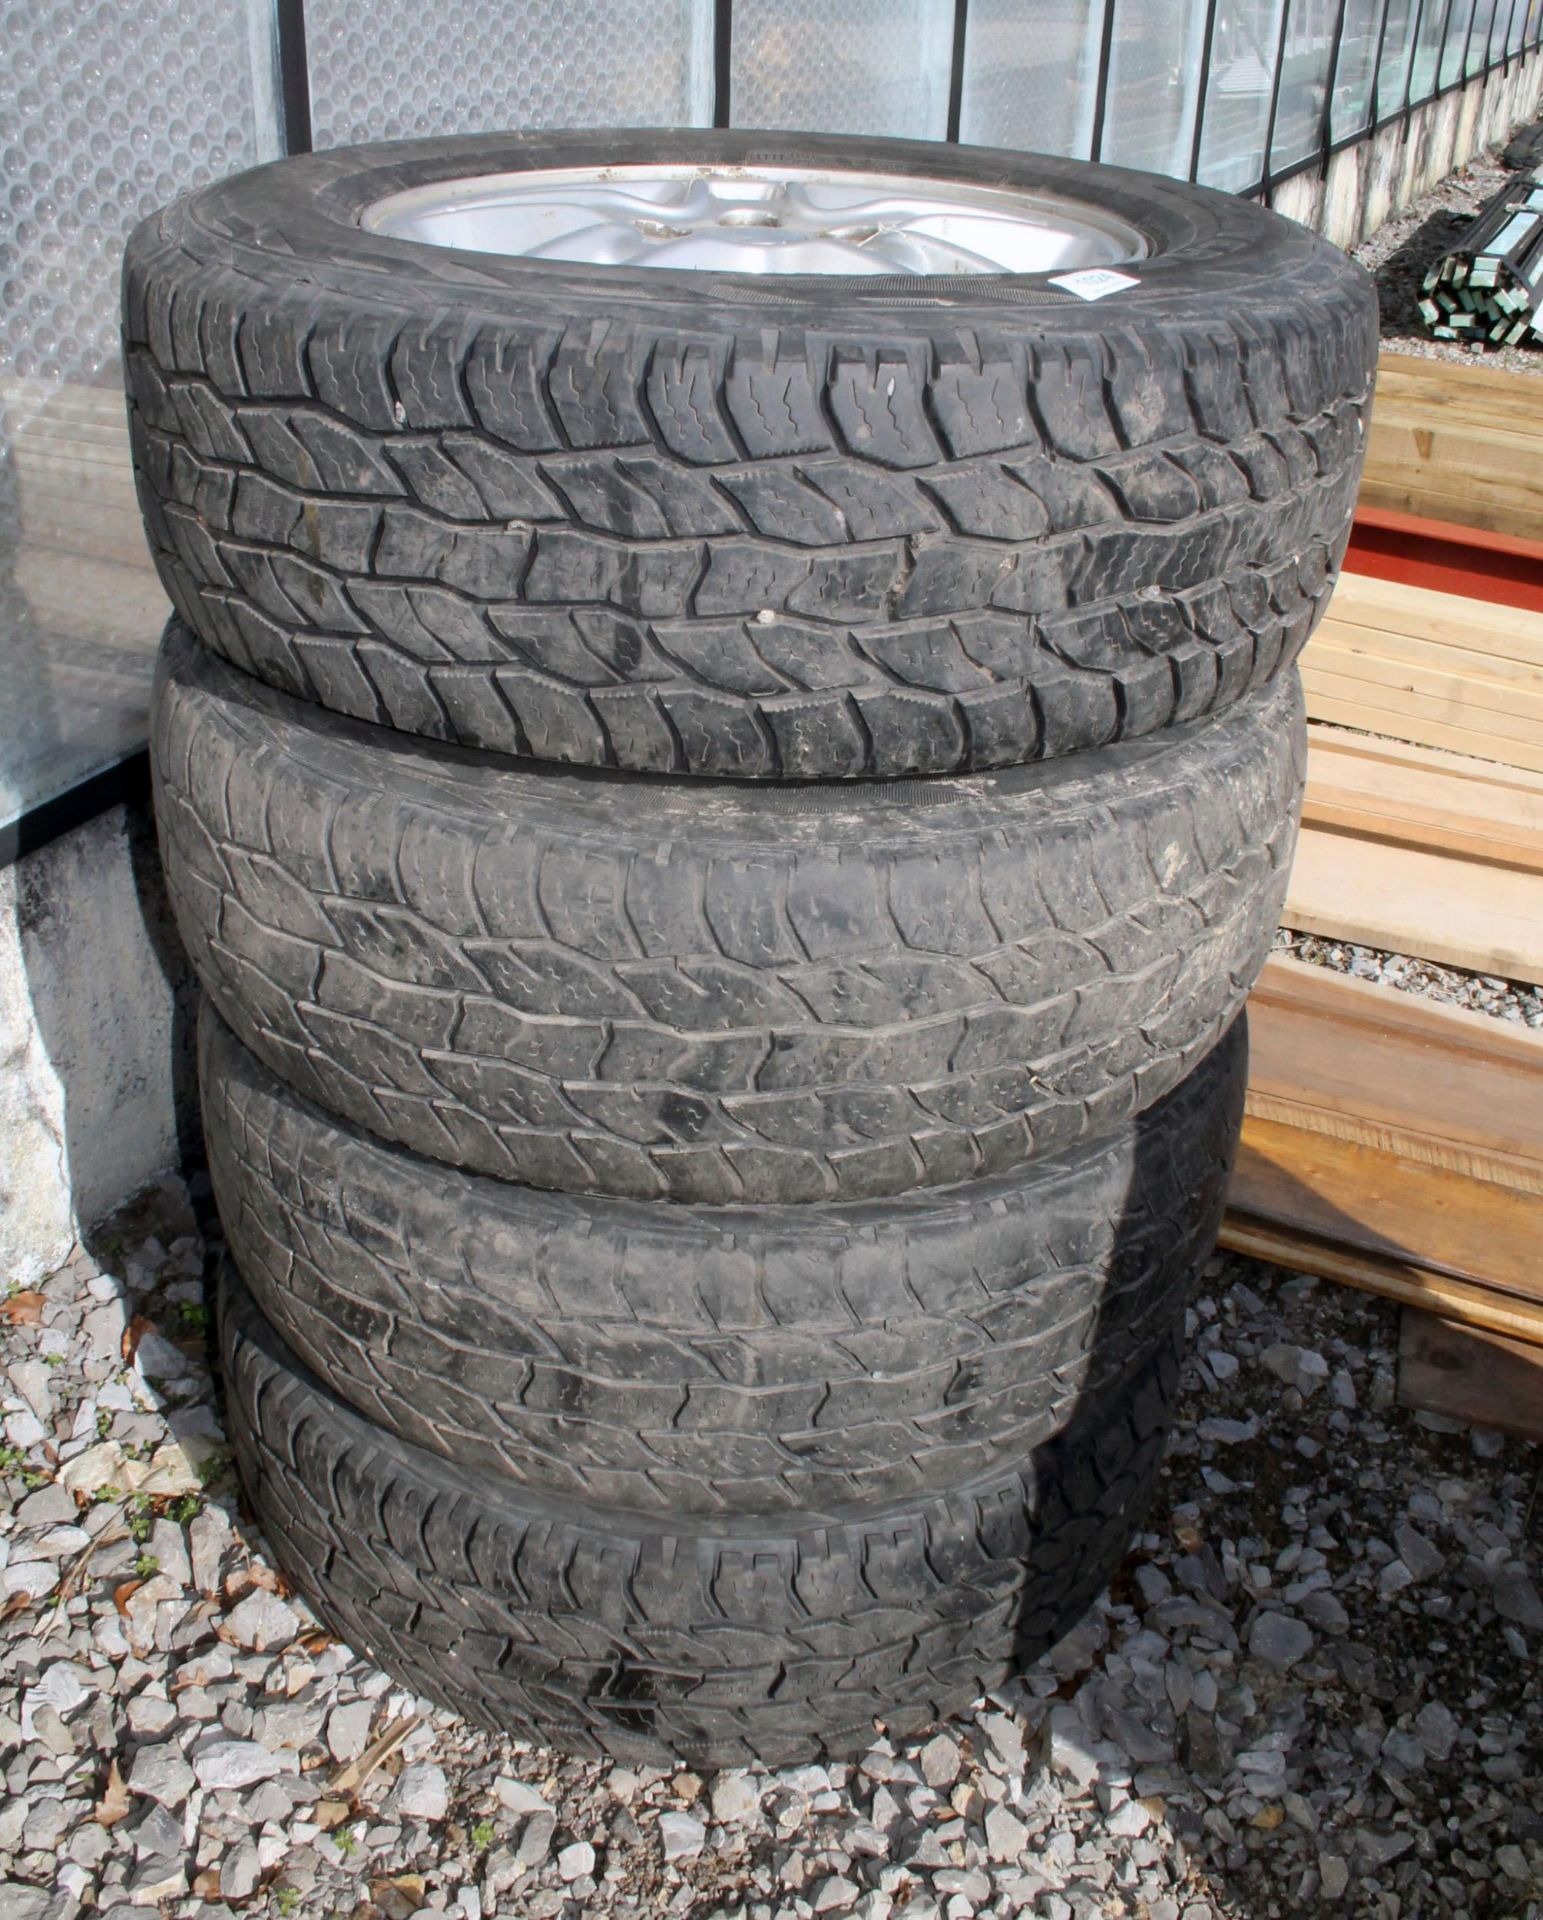 4 LAND ROVER WHEELS AND TYRES 235/70-R17 NO VAT